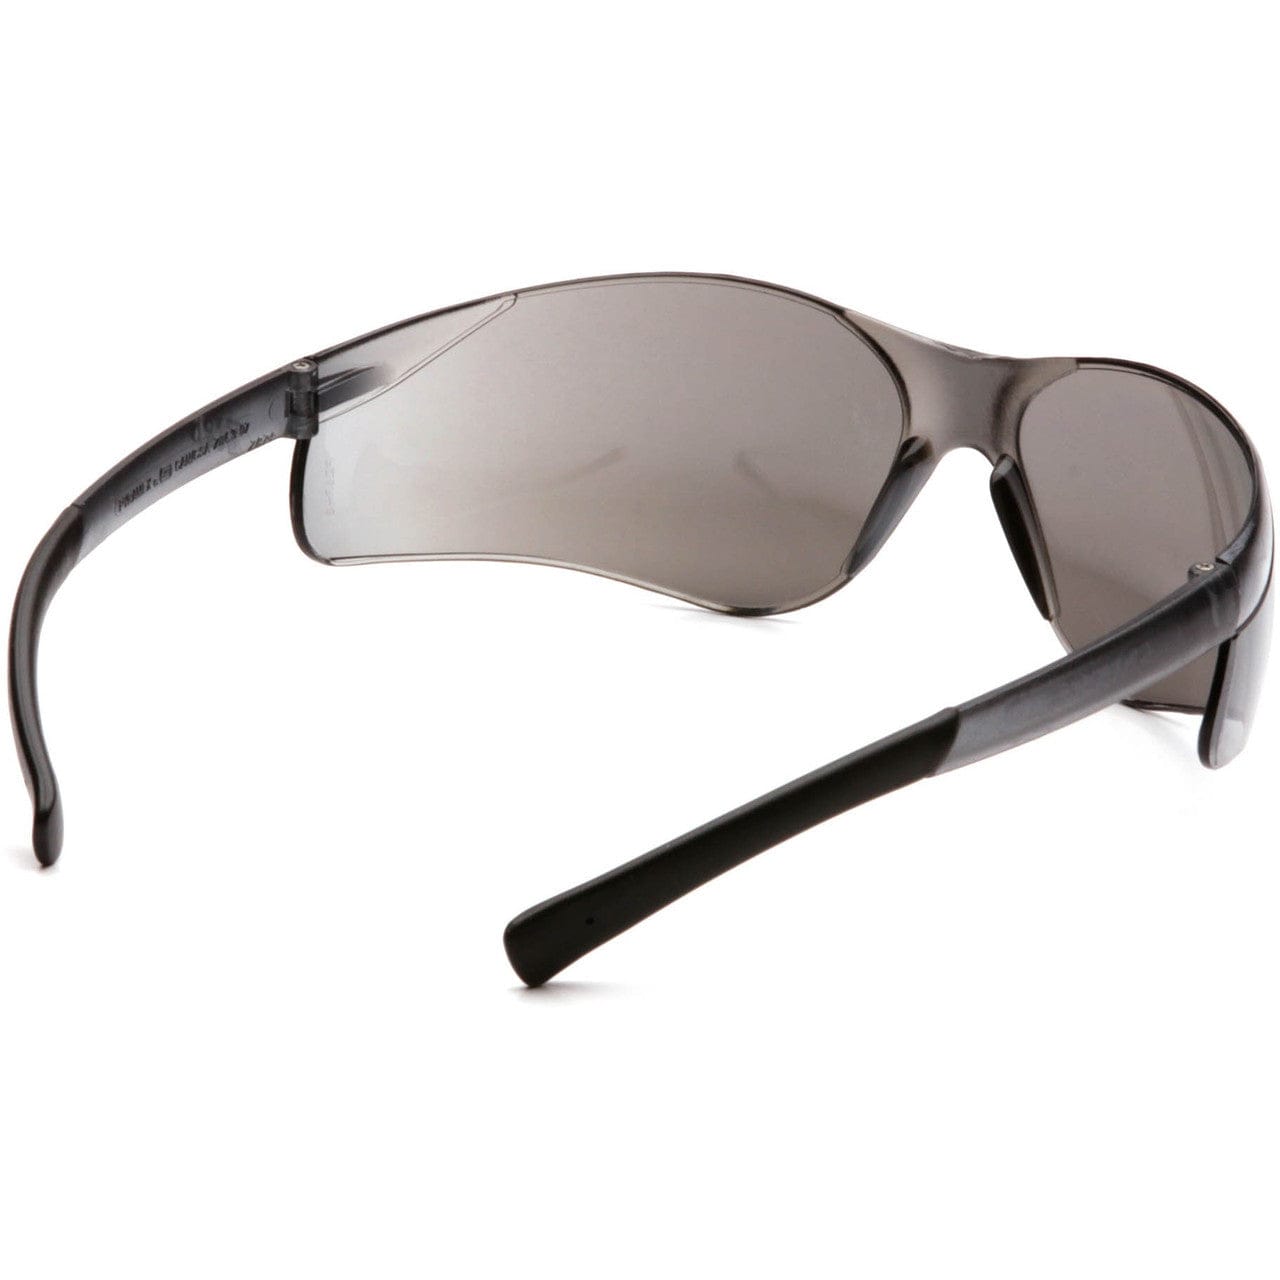 Pyramex Ztek Safety Glasses with Silver Mirror Lens S2570S Inside View